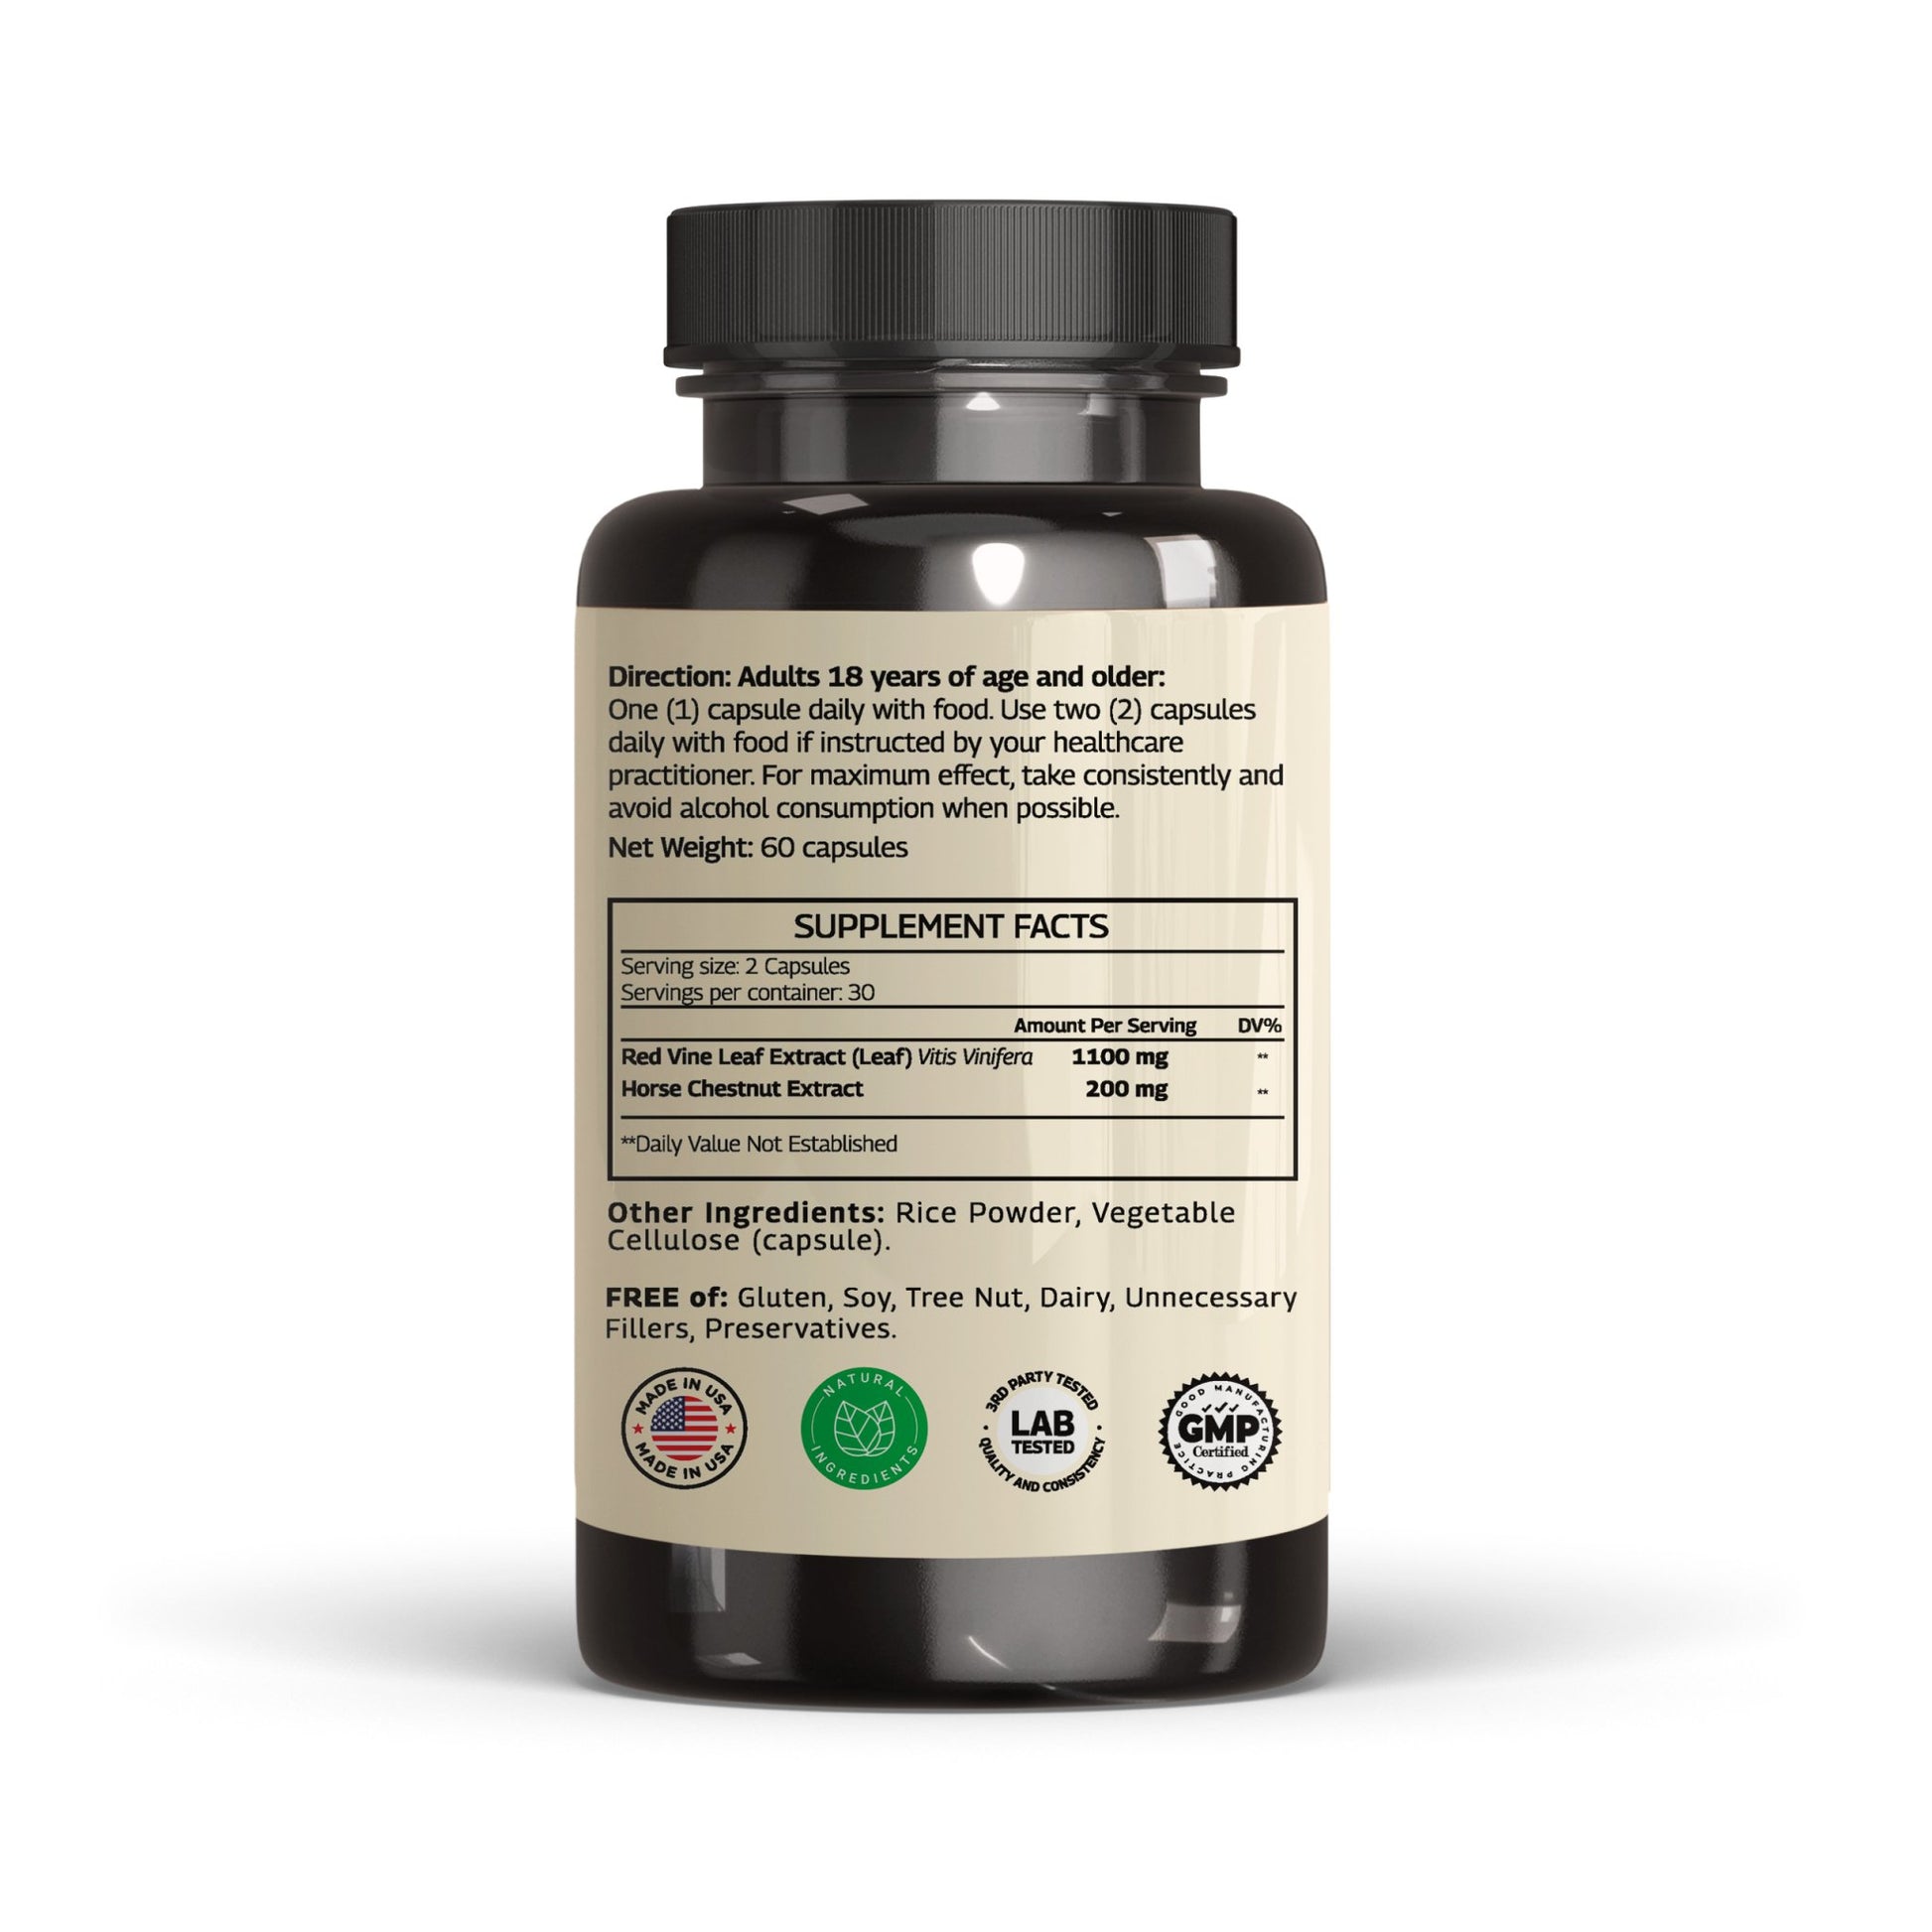 Red vine leaf extract with horse chestnut supplement fact